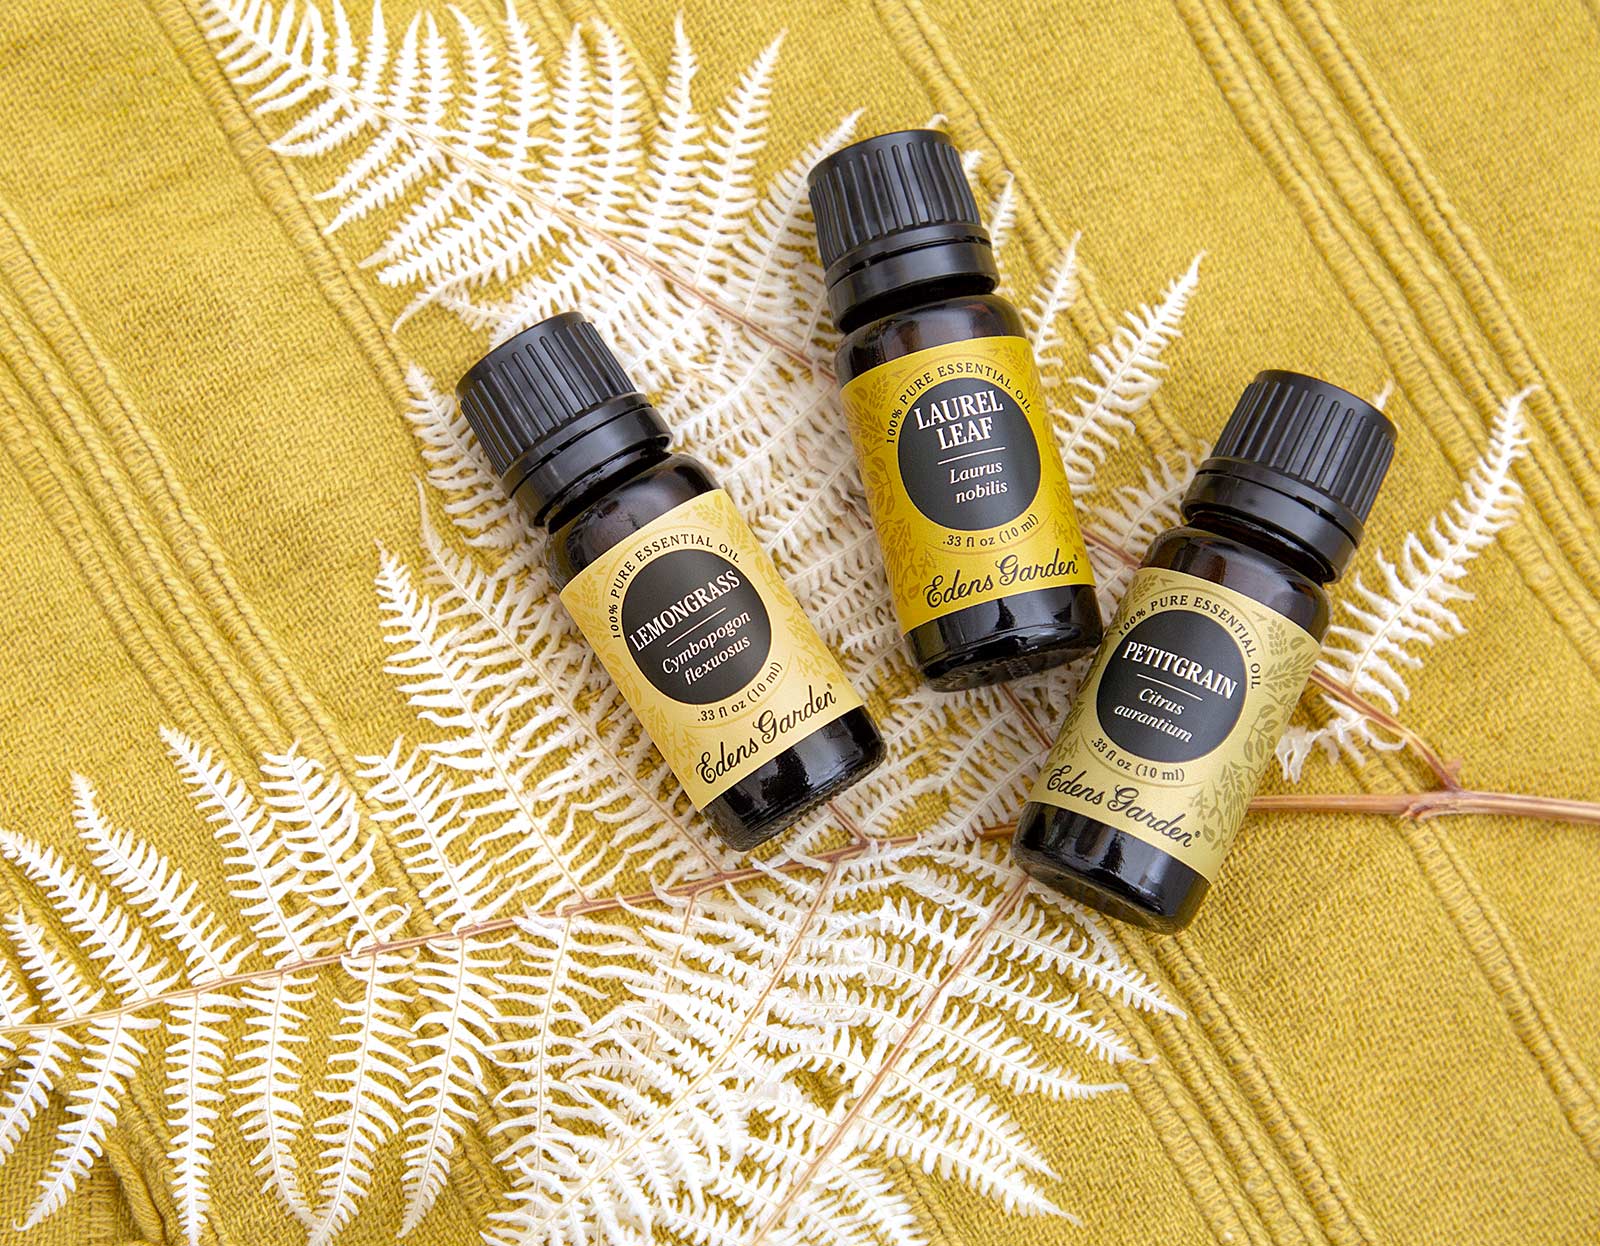 What Is An Essential Oil?